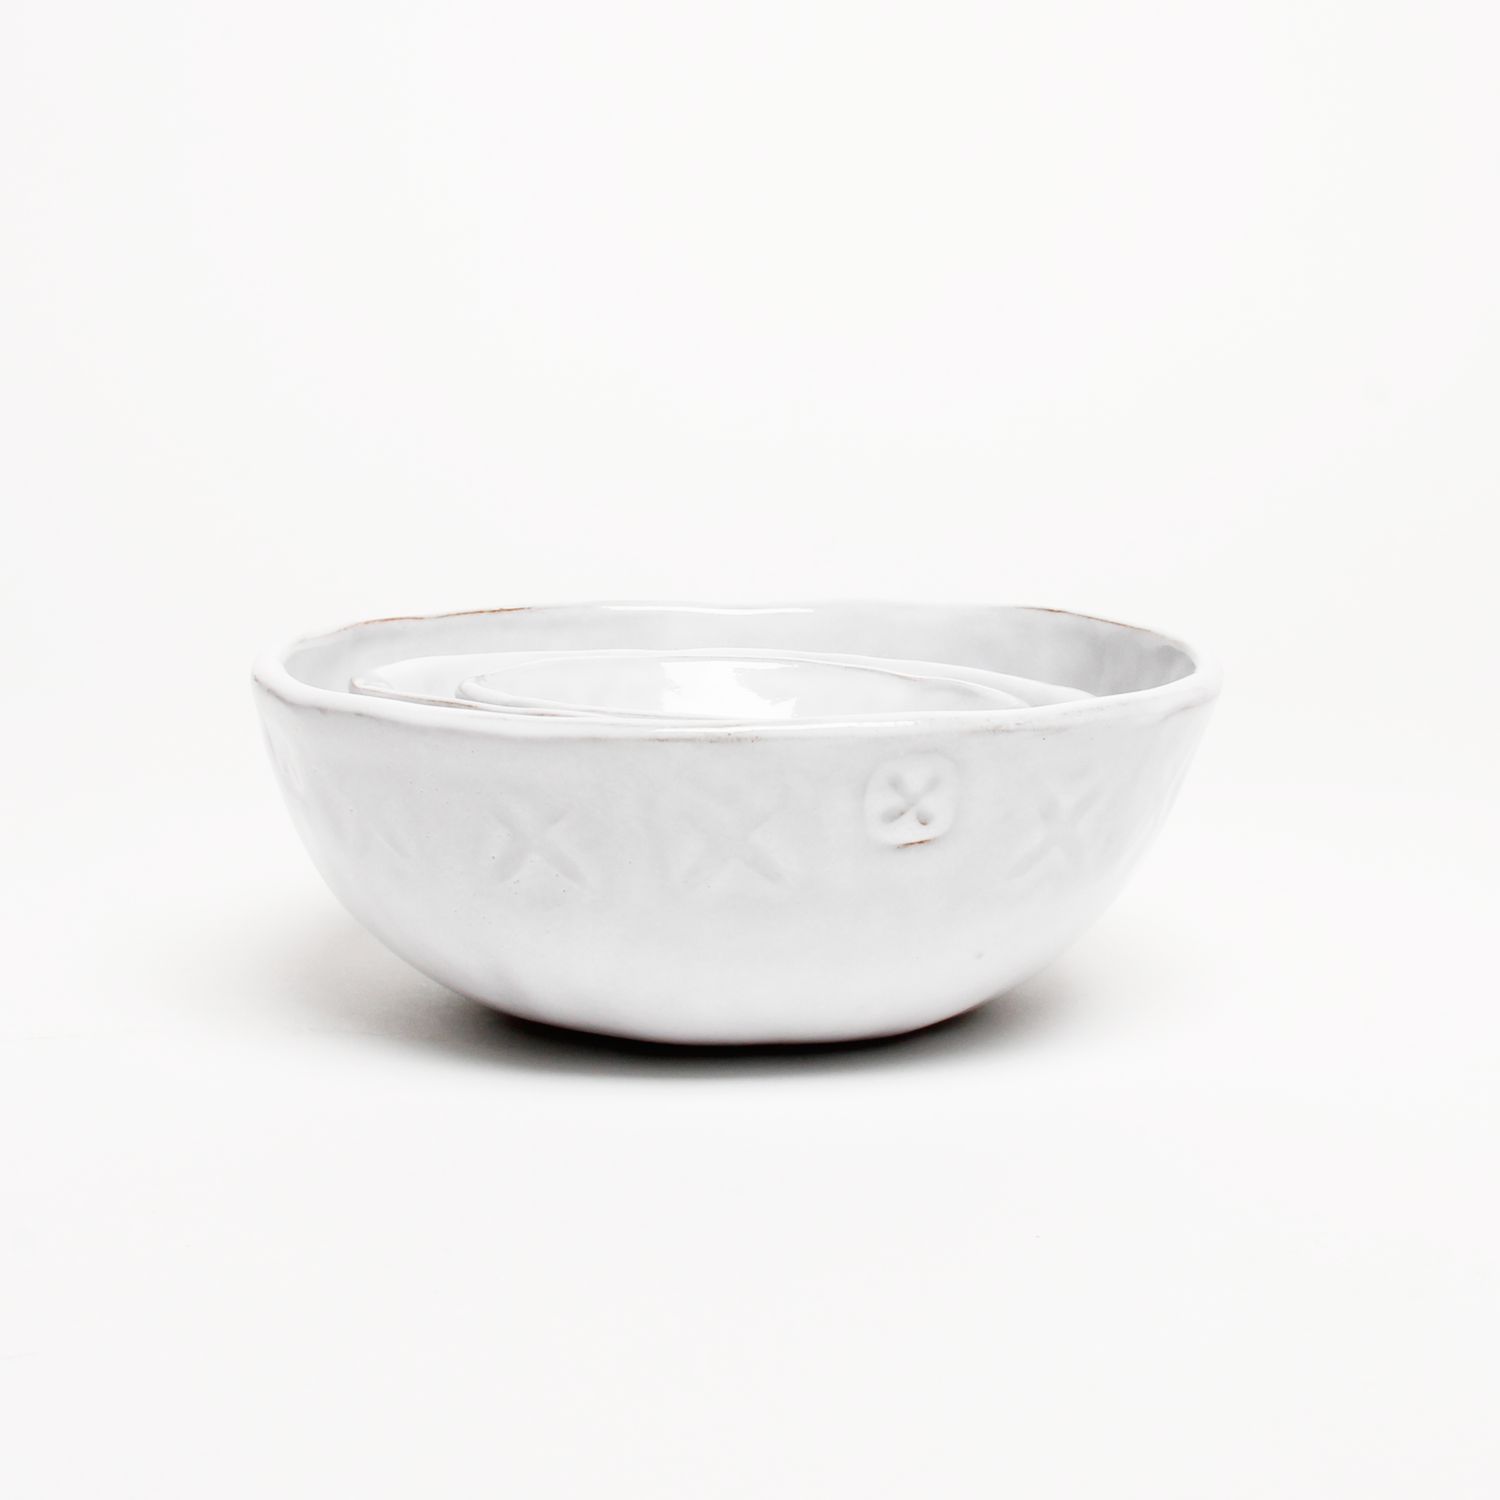 Jacquie Blondin: Nesting Bowl with Carved X Design (Set of 3) Product Image 2 of 4